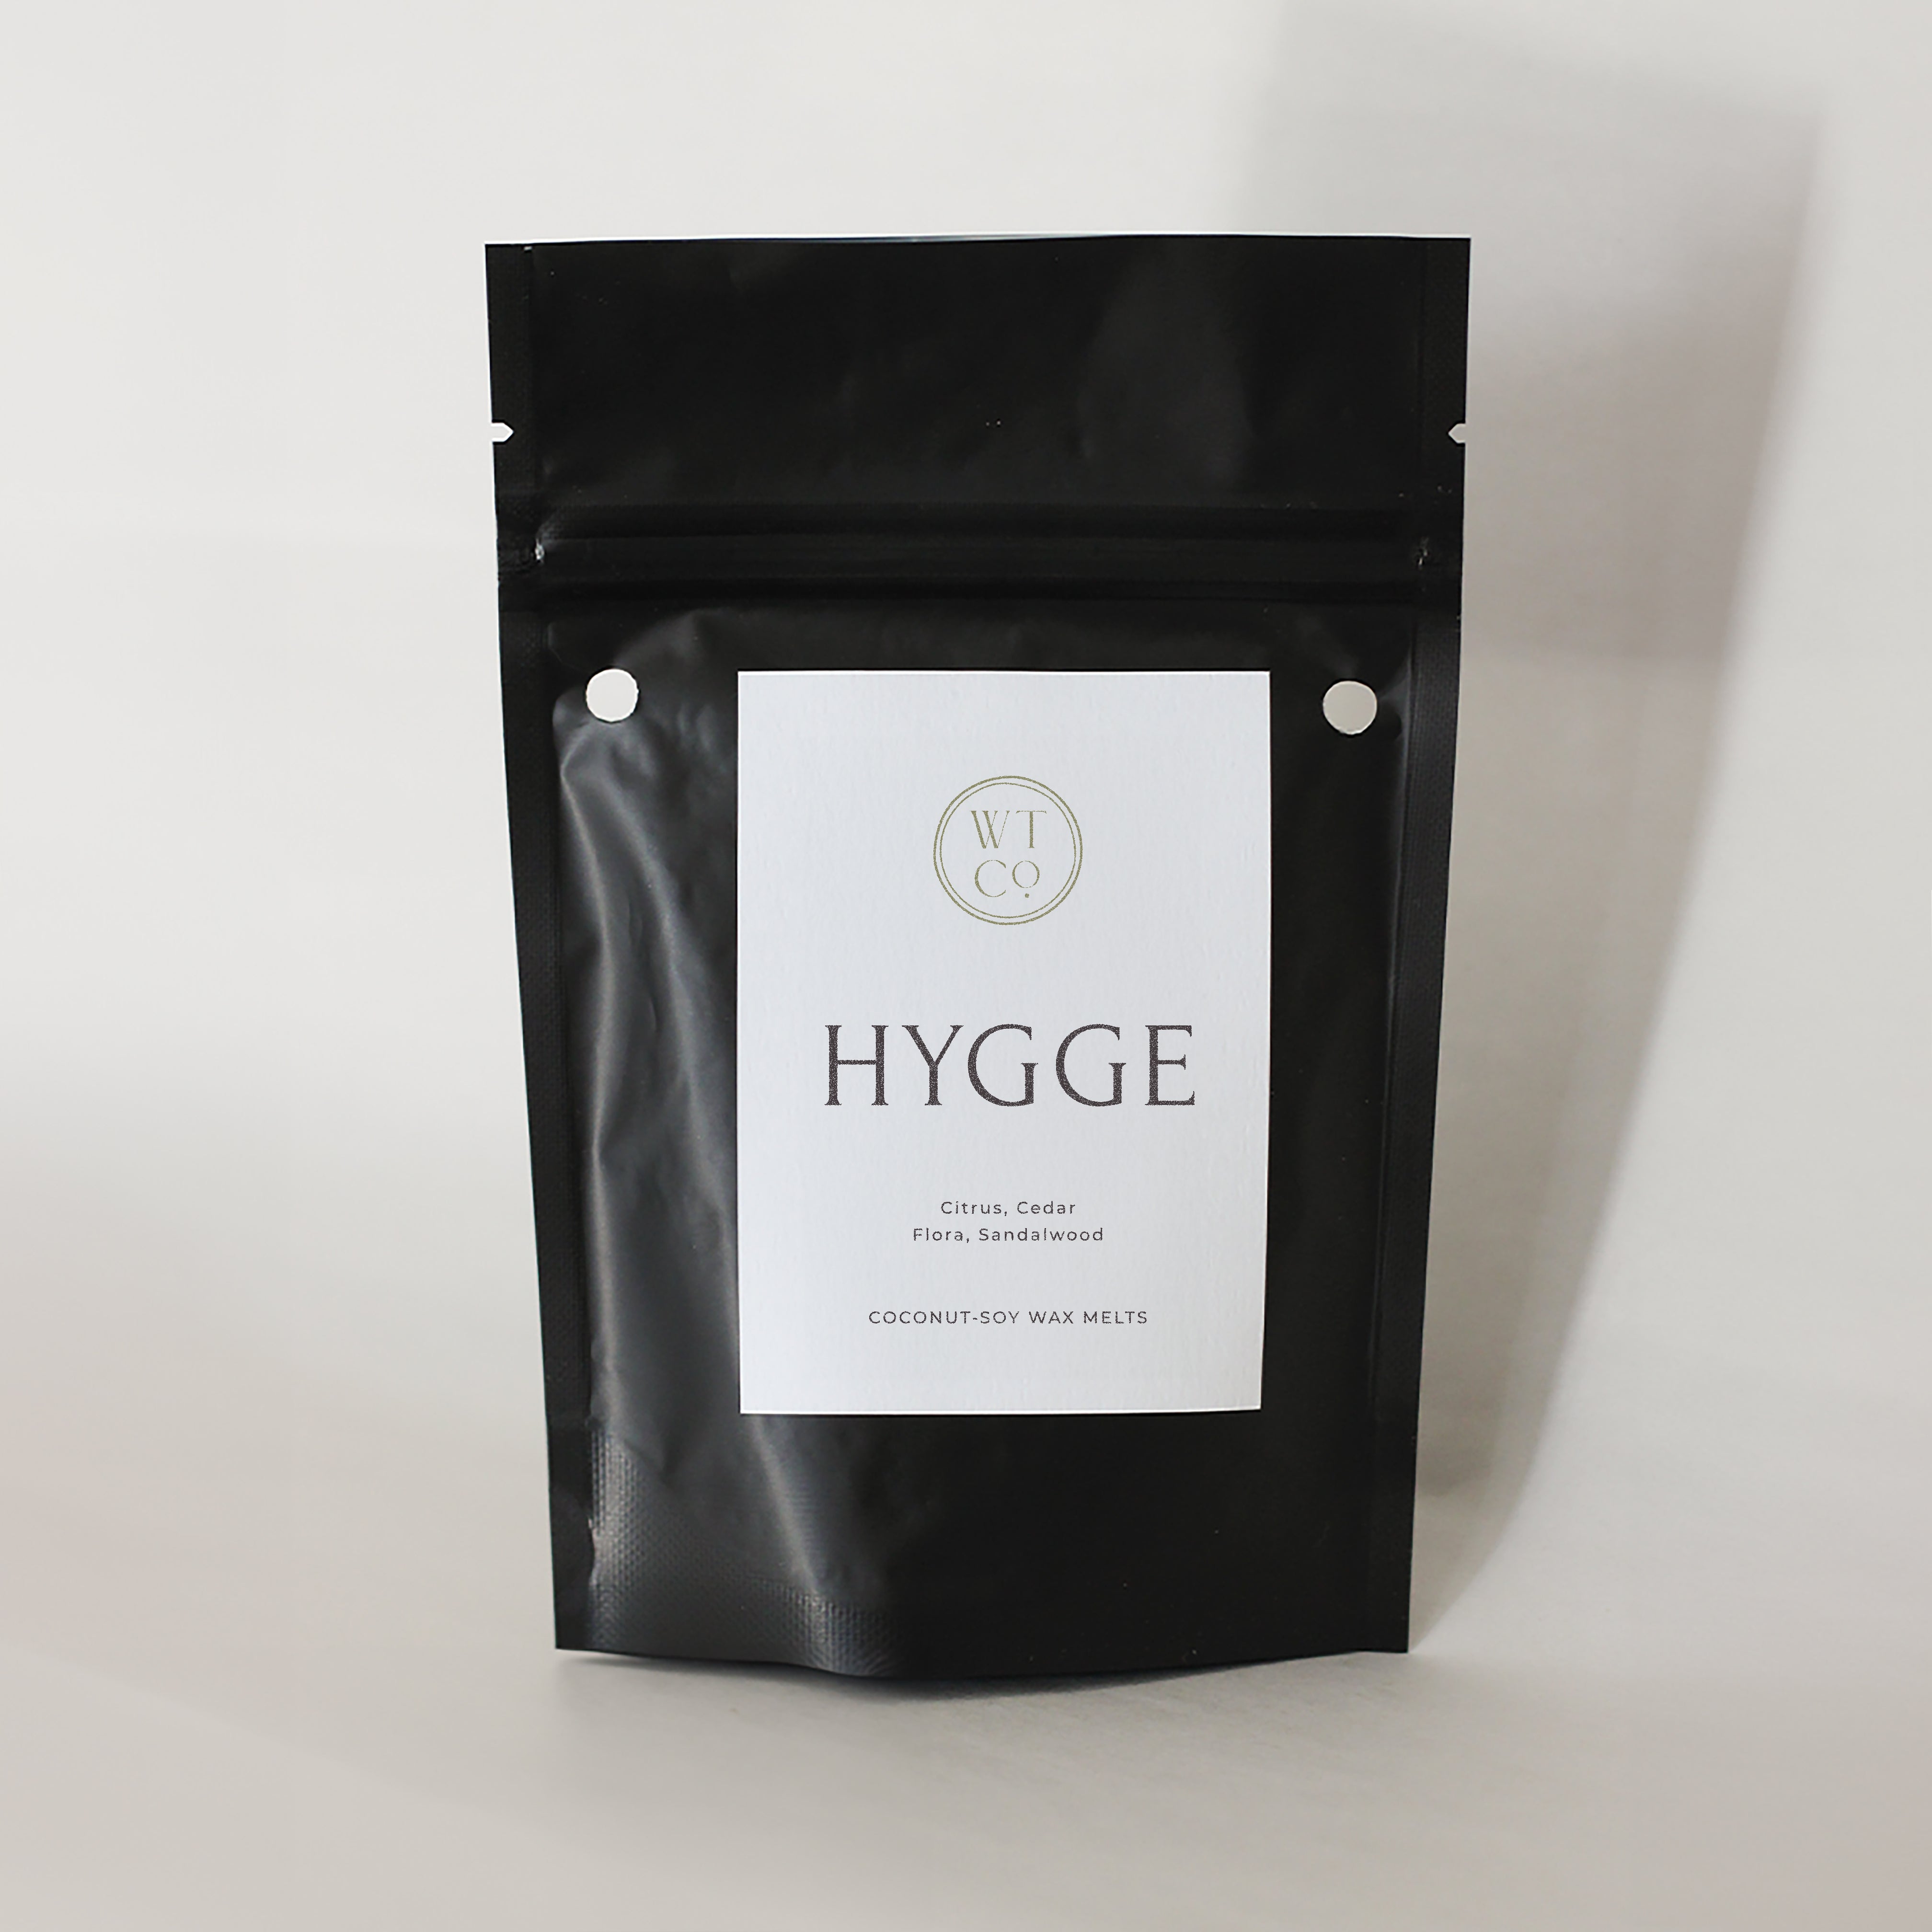 Hygge Coconut-Soy Wax Melts | Well-Taylored Co.